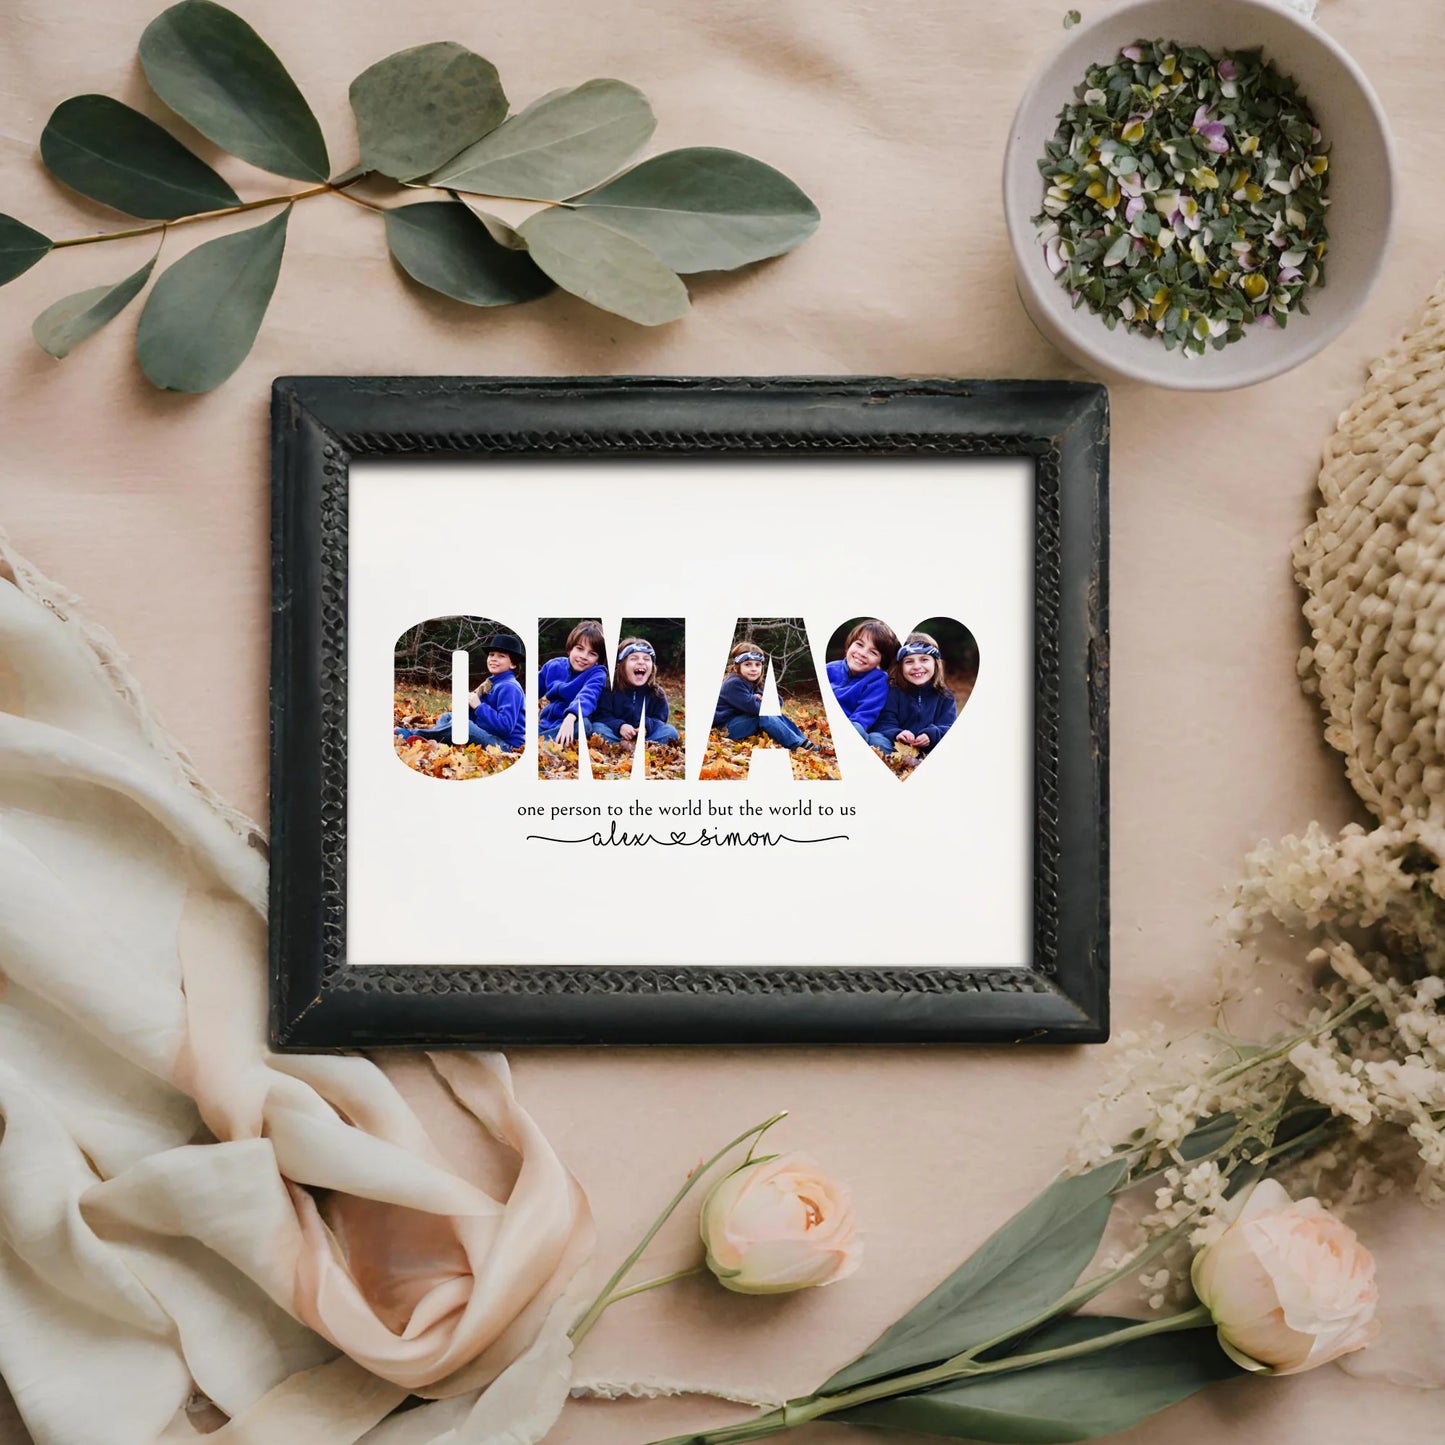 Oma personalized photo collage template last minute gift for grandma